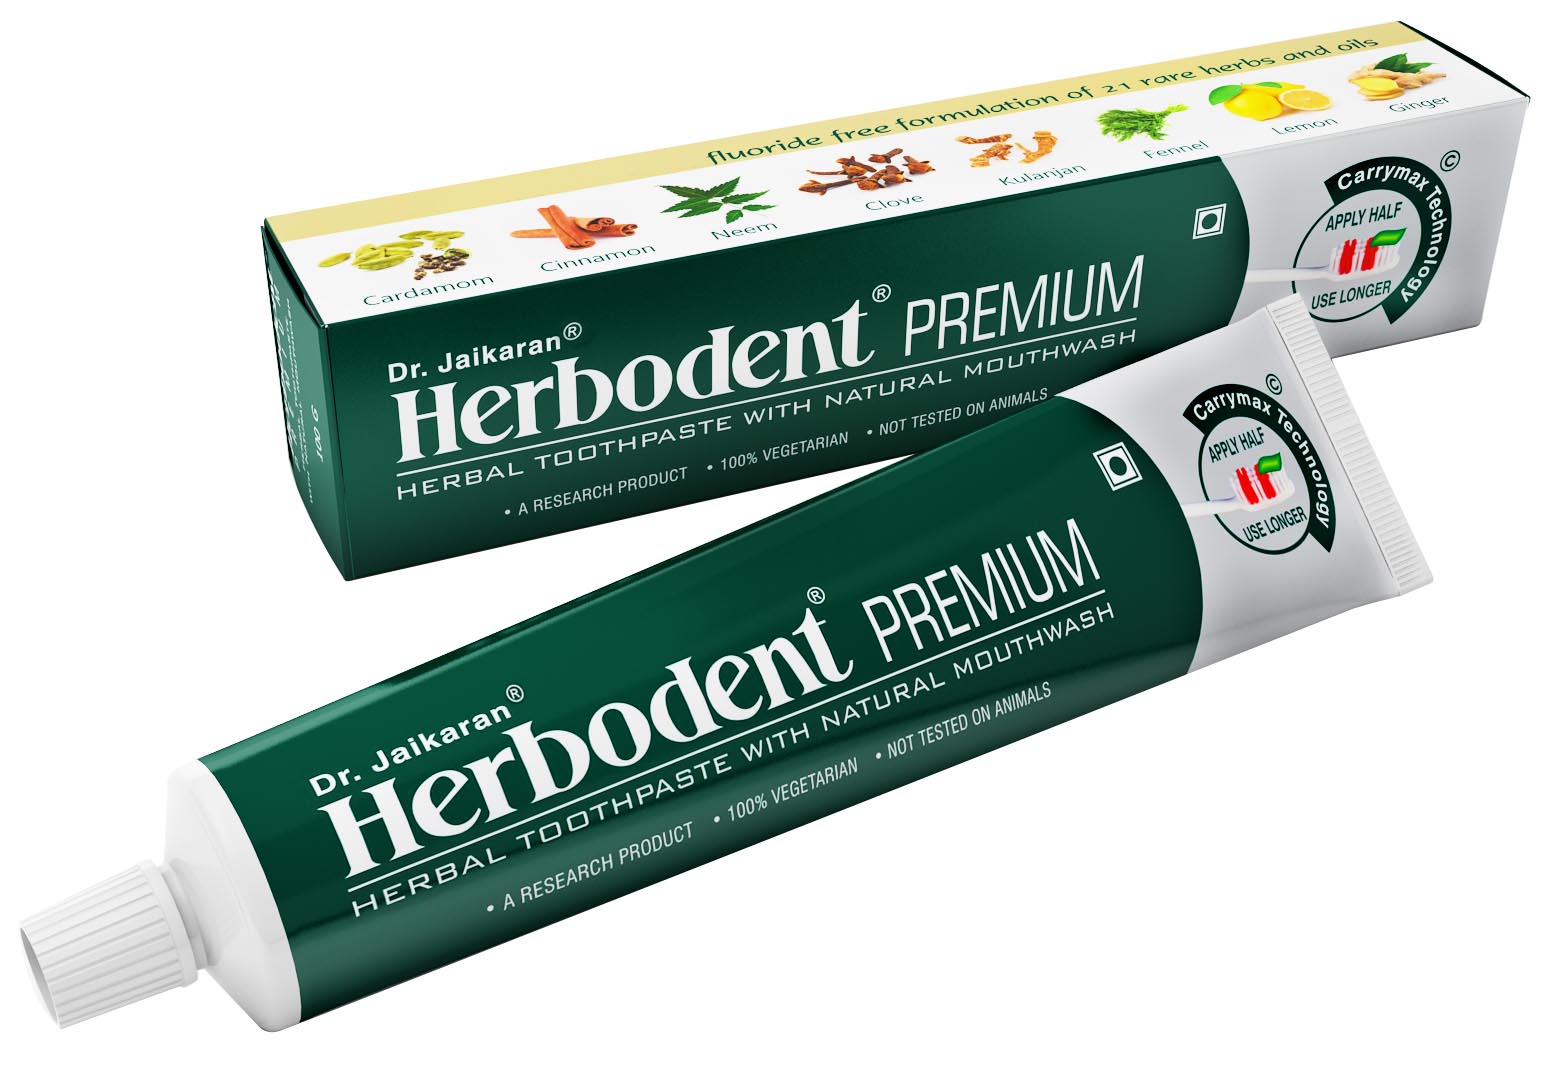 Herbodent Toothpaste